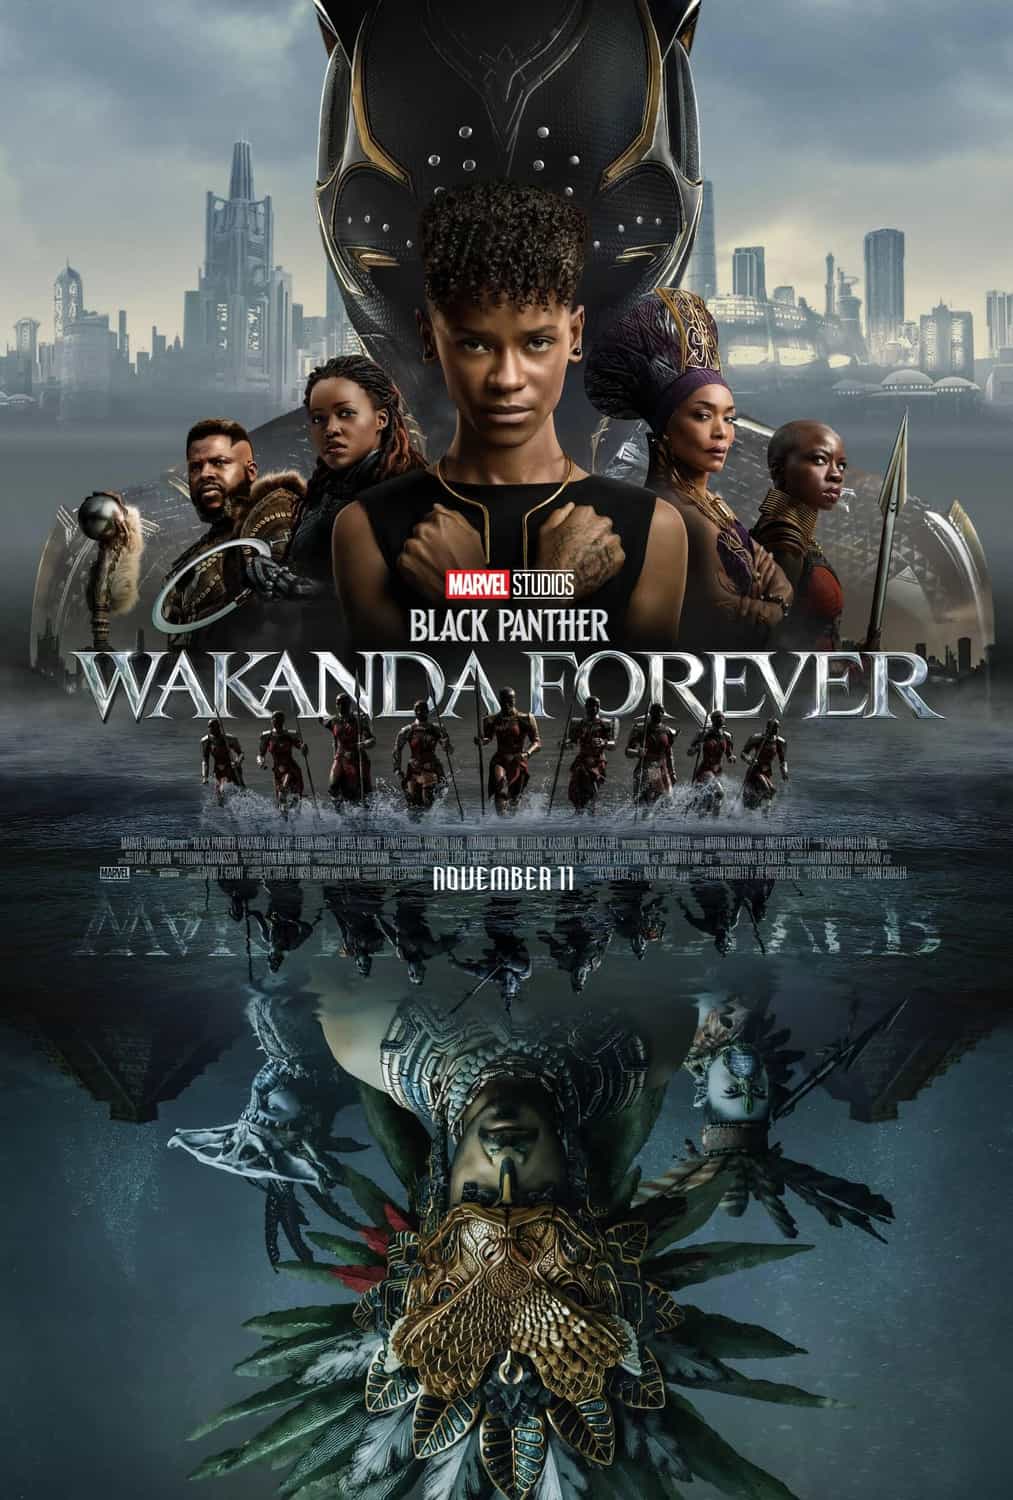 UK Box Office Weekend Report 11th - 13th November 2022:  Black Panther: Wakanda Forever makes its Uk debut at the top of the box office with £13 Million